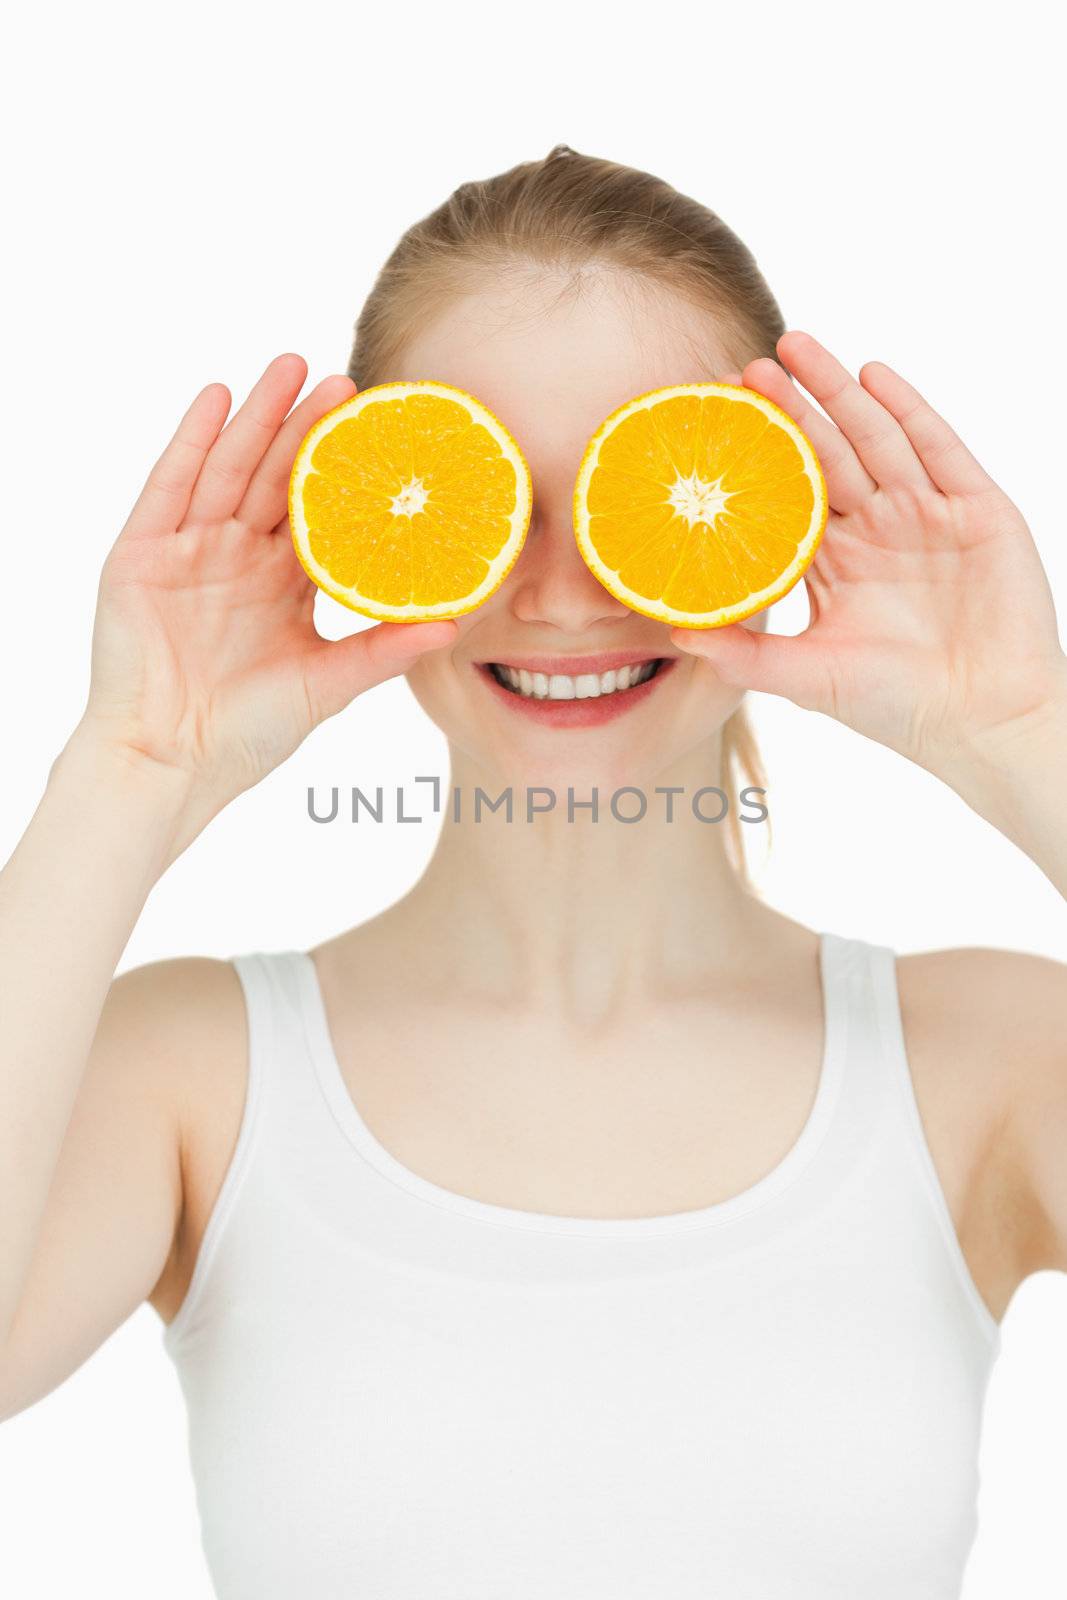 Cheerful woman placing oranges on her eyes against white background